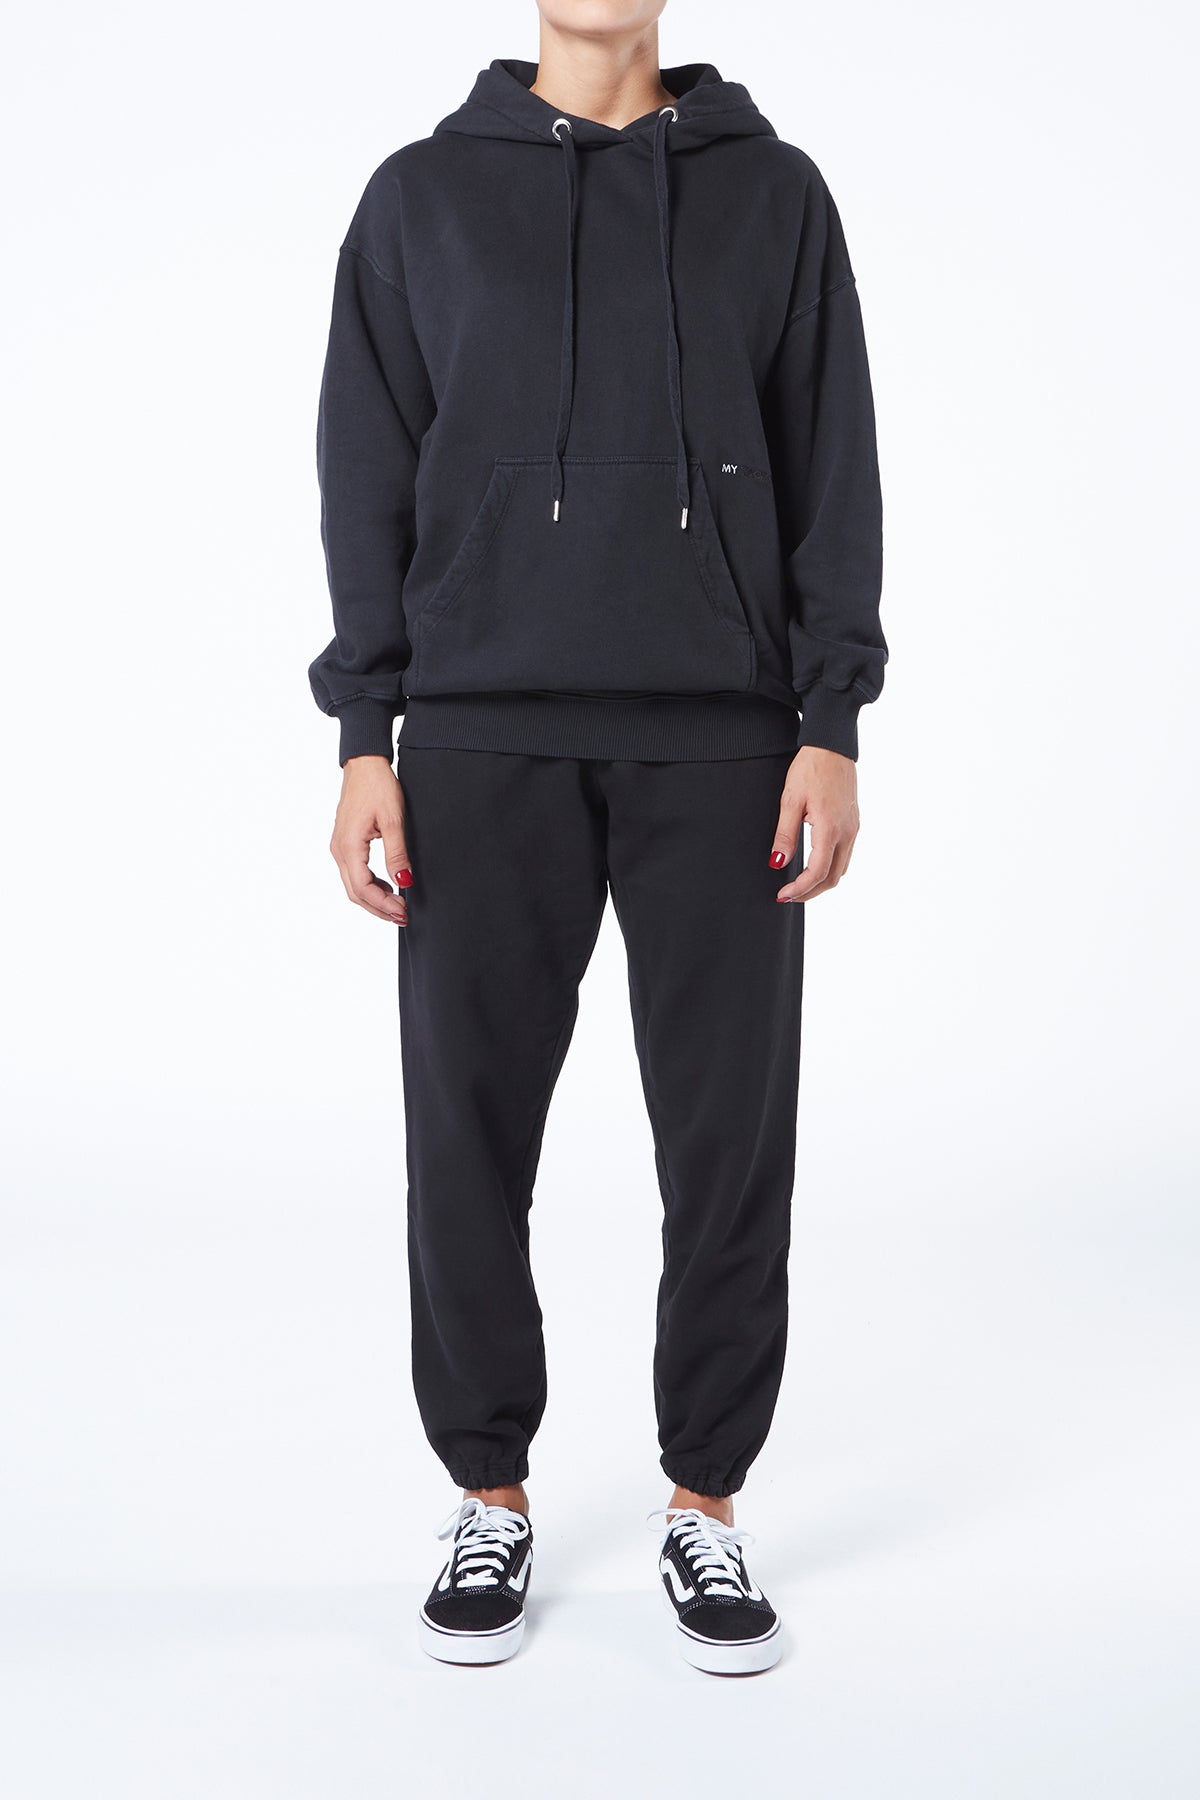 MYTRACKSUIT - HOODIE SWEATER/JOGGER PANTS BLACK